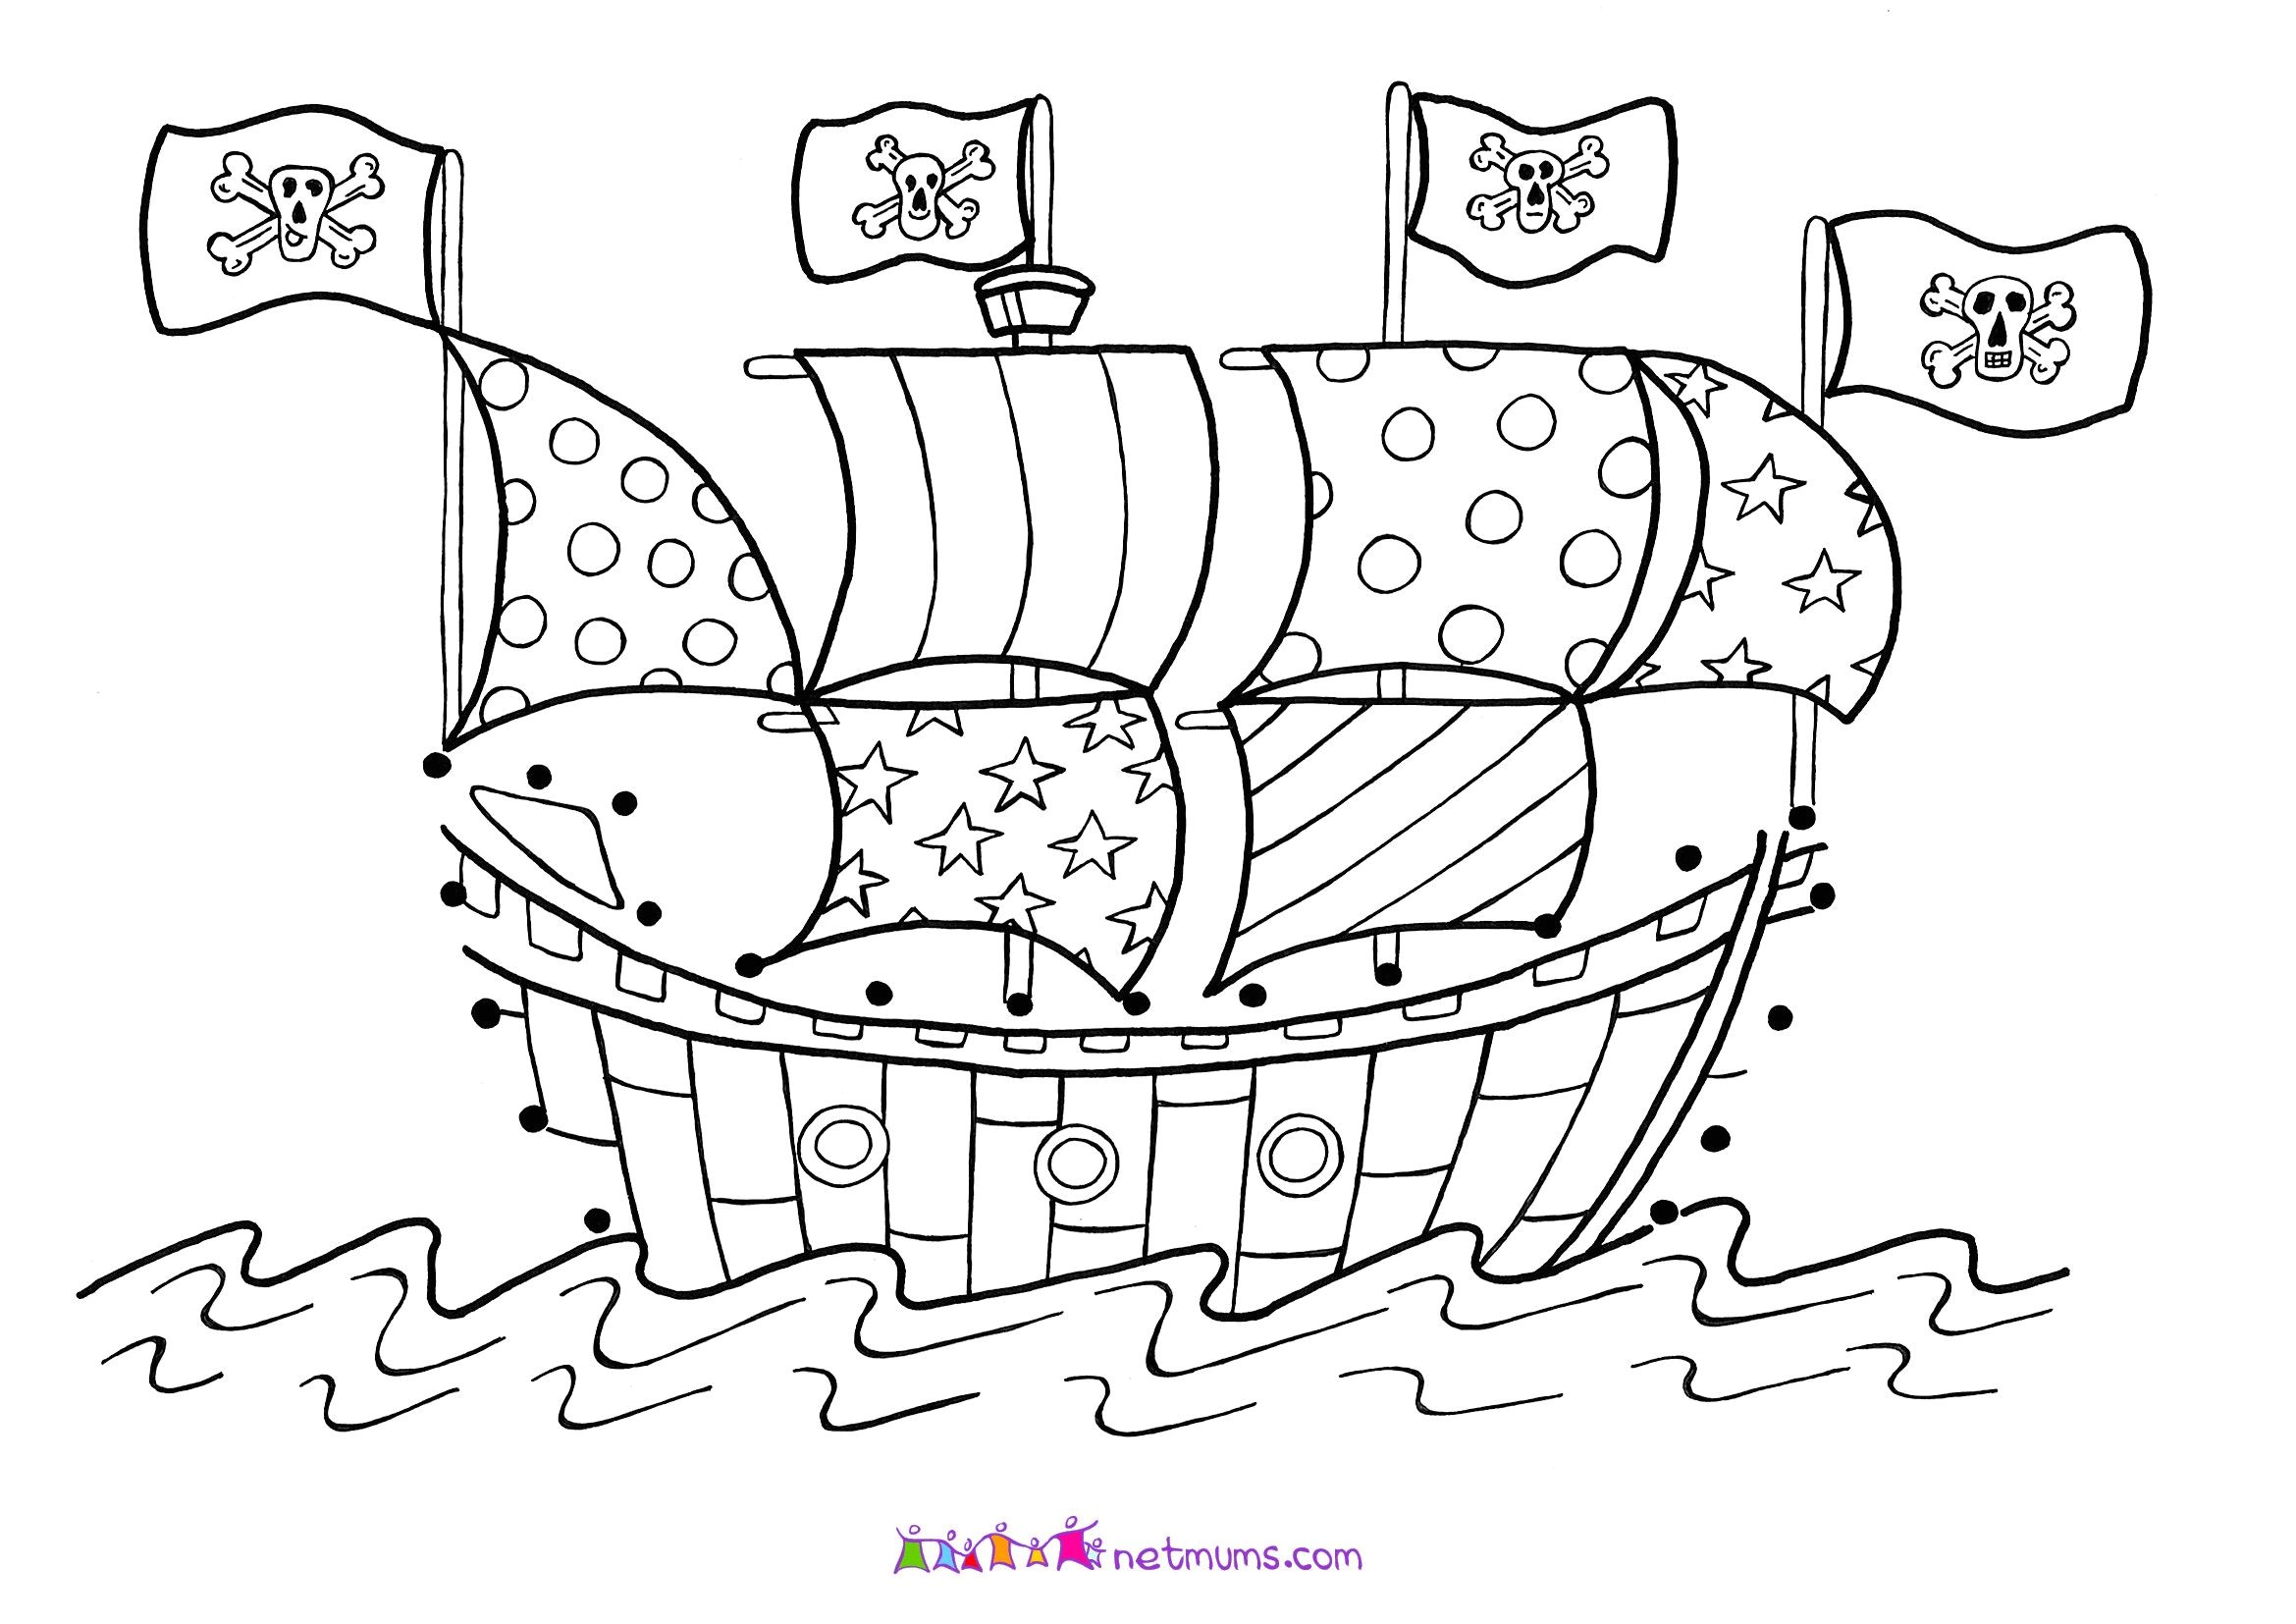 Here are some pirate theme colouring pages for you to enjoy